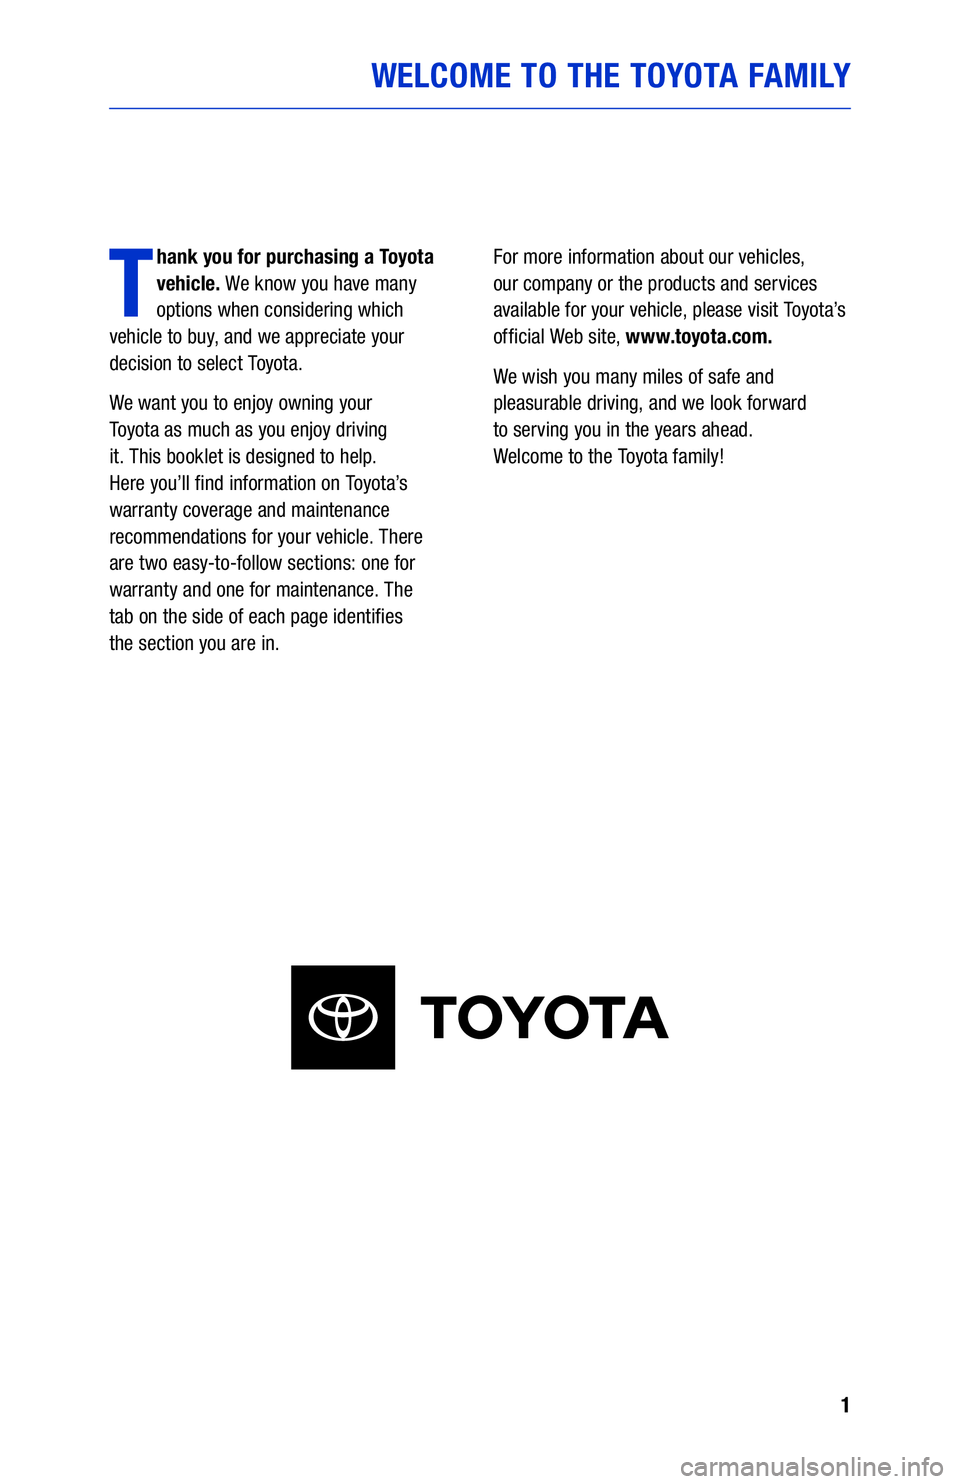 TOYOTA CAMRY HYBRID 2020  Warranties & Maintenance Guides (in English) 1
WELCOME TO THE TOYOTA FAMILY
T
hank you for purchasing a Toyota 
vehicle. We know you have many 
options when considering which   
vehicle to buy, and we appreciate your 
decision to select Toyota.
